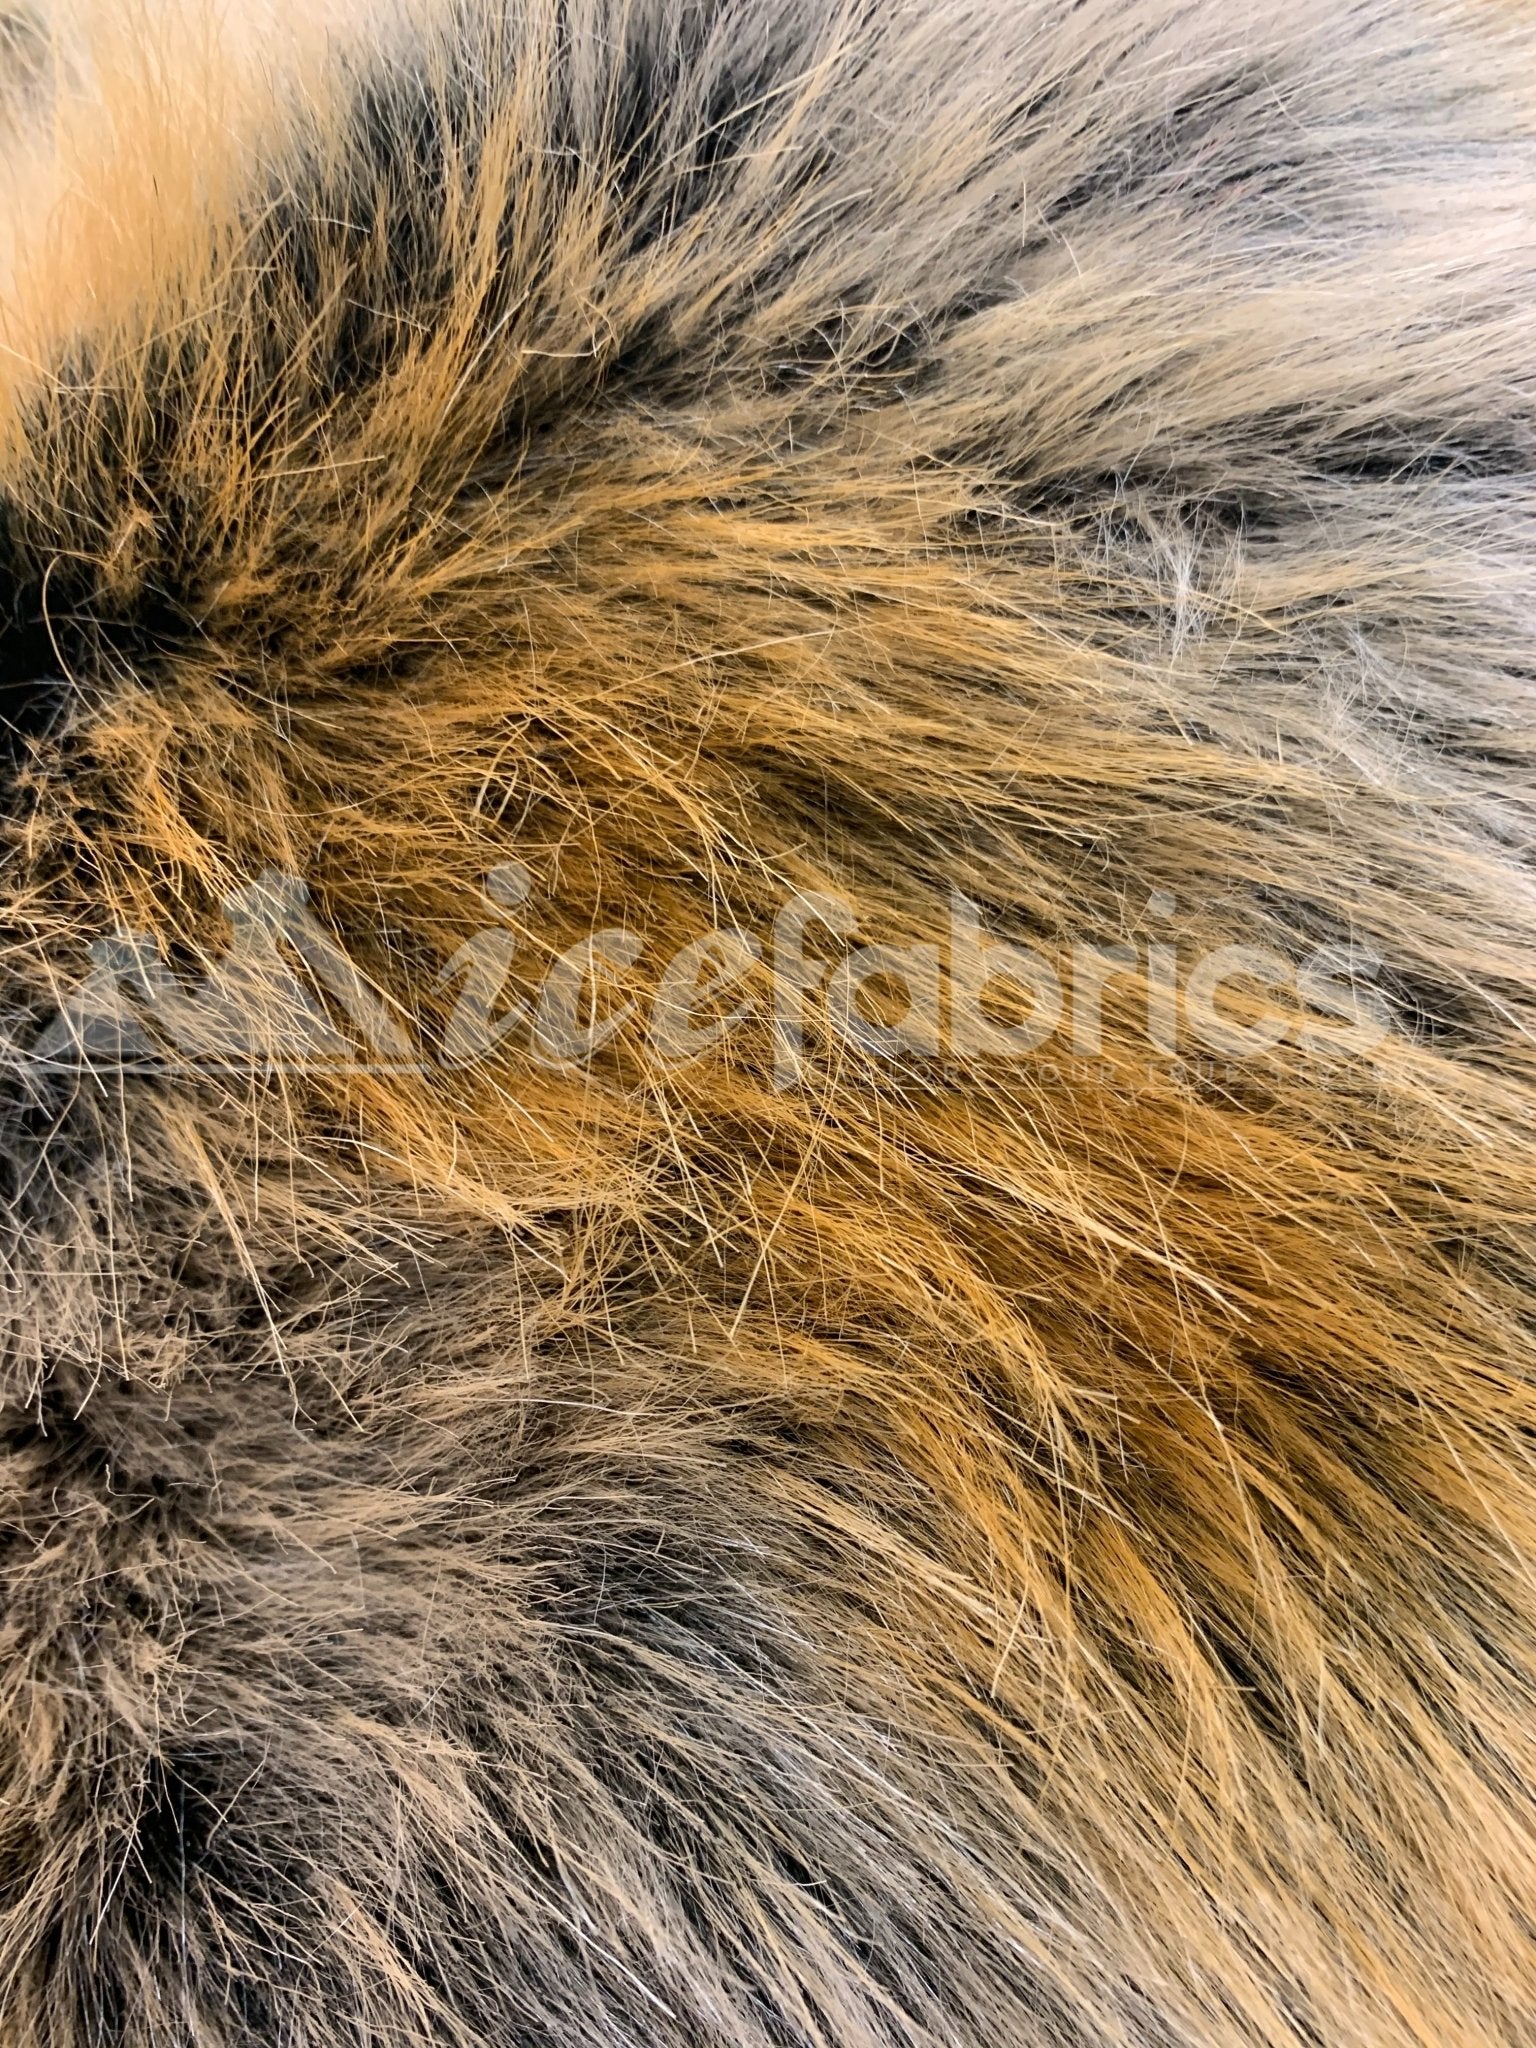 Fashion Stripe Brown & Gold Thick Faux Fur Fabric By The Yard MaterialICEFABRICICE FABRICSBy The Yard (60 inches Wide)Fashion Stripe Brown & Gold Thick Faux Fur Fabric By The Yard Material ICEFABRIC